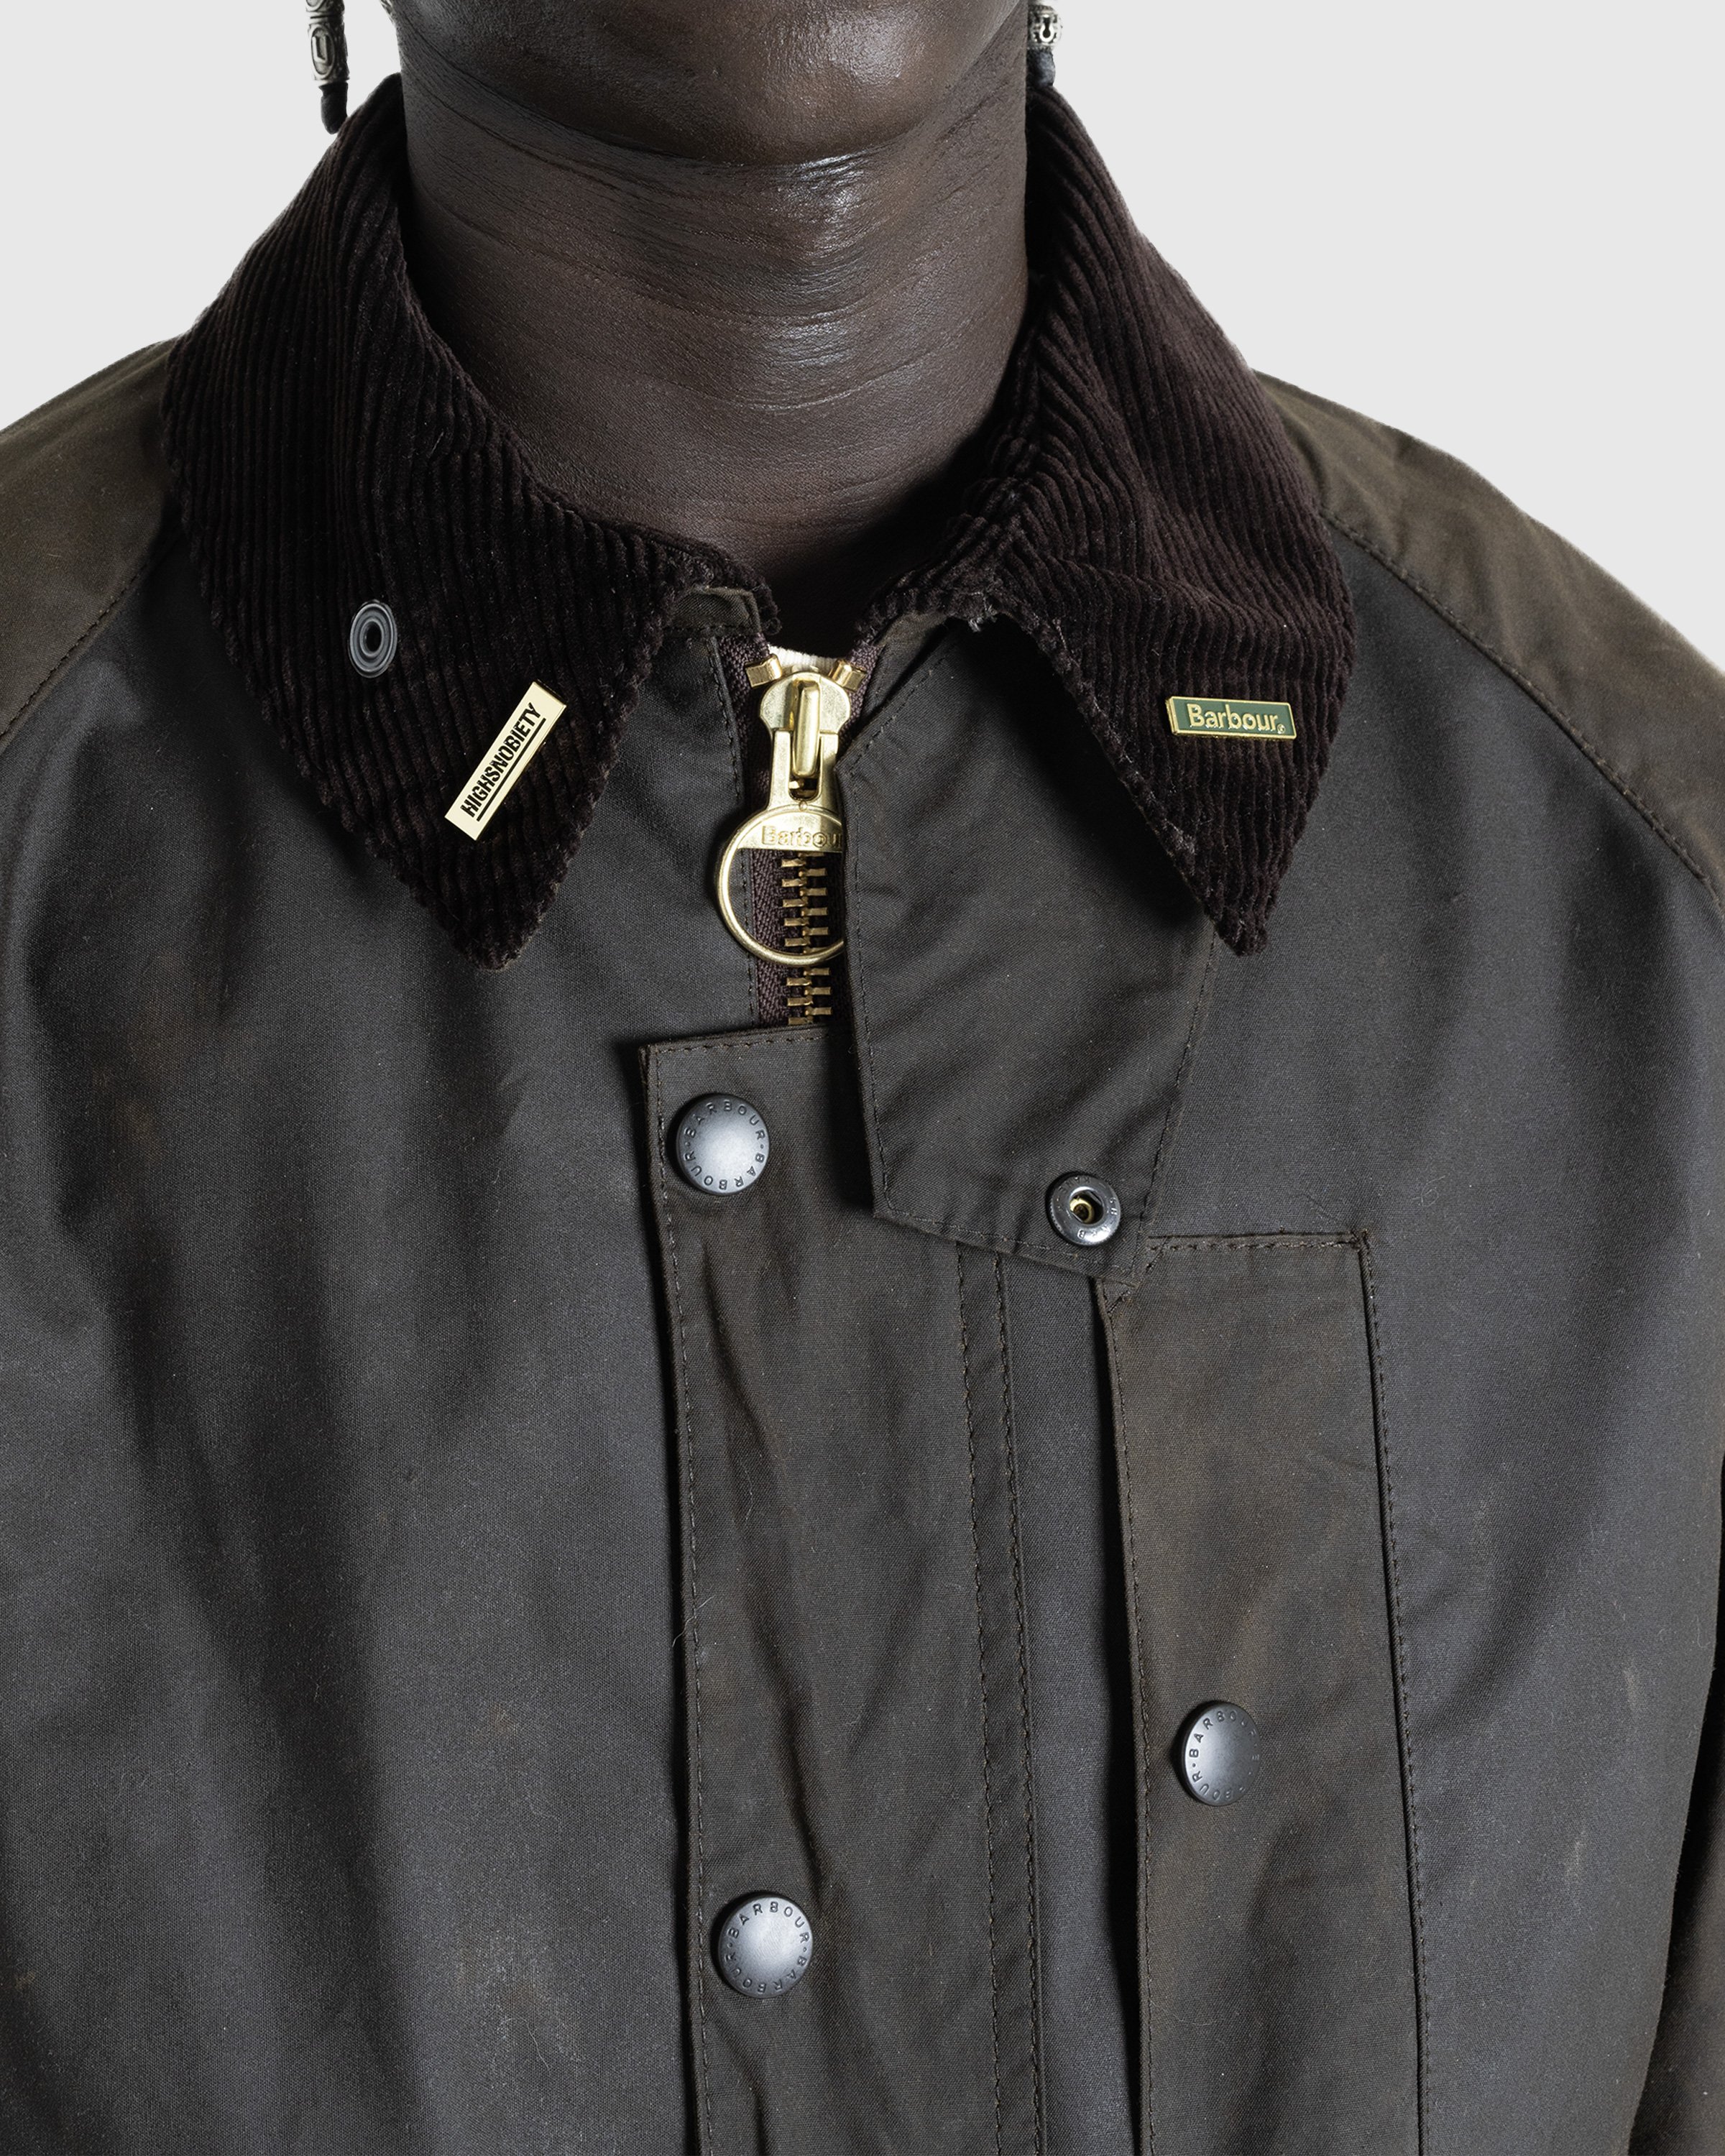 Barbour x Highsnobiety - Re-Loved Cropped Bedale Jacket 1 - 42 - Dark-Green - Clothing - Olive - Image 6